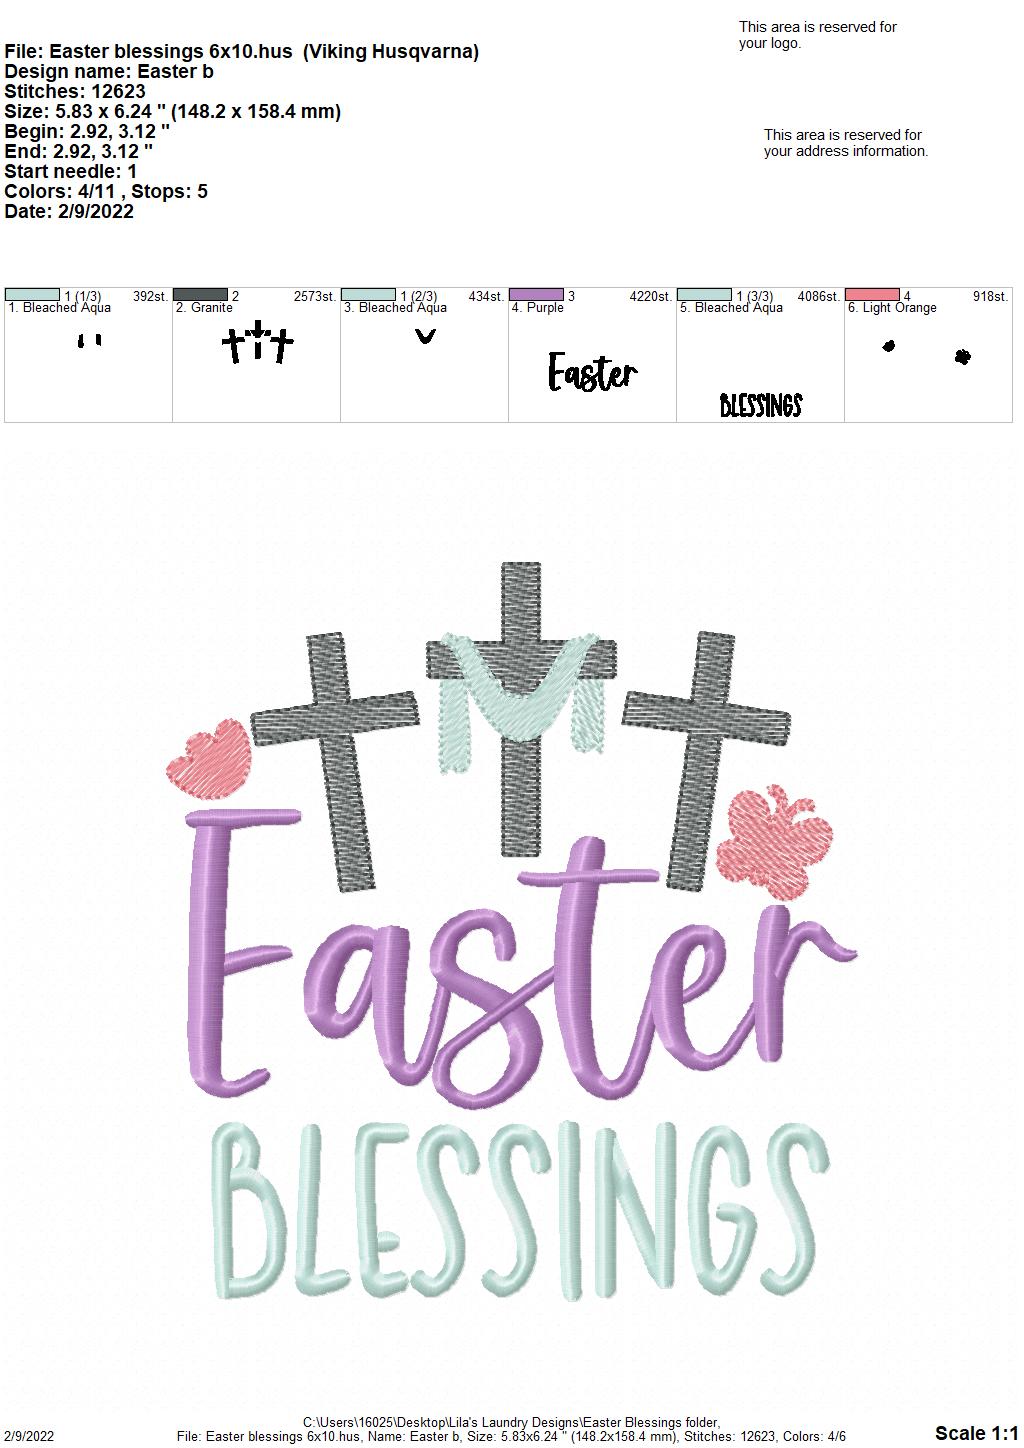 Easter Blessings - 3 sizes- Digital Embroidery Design